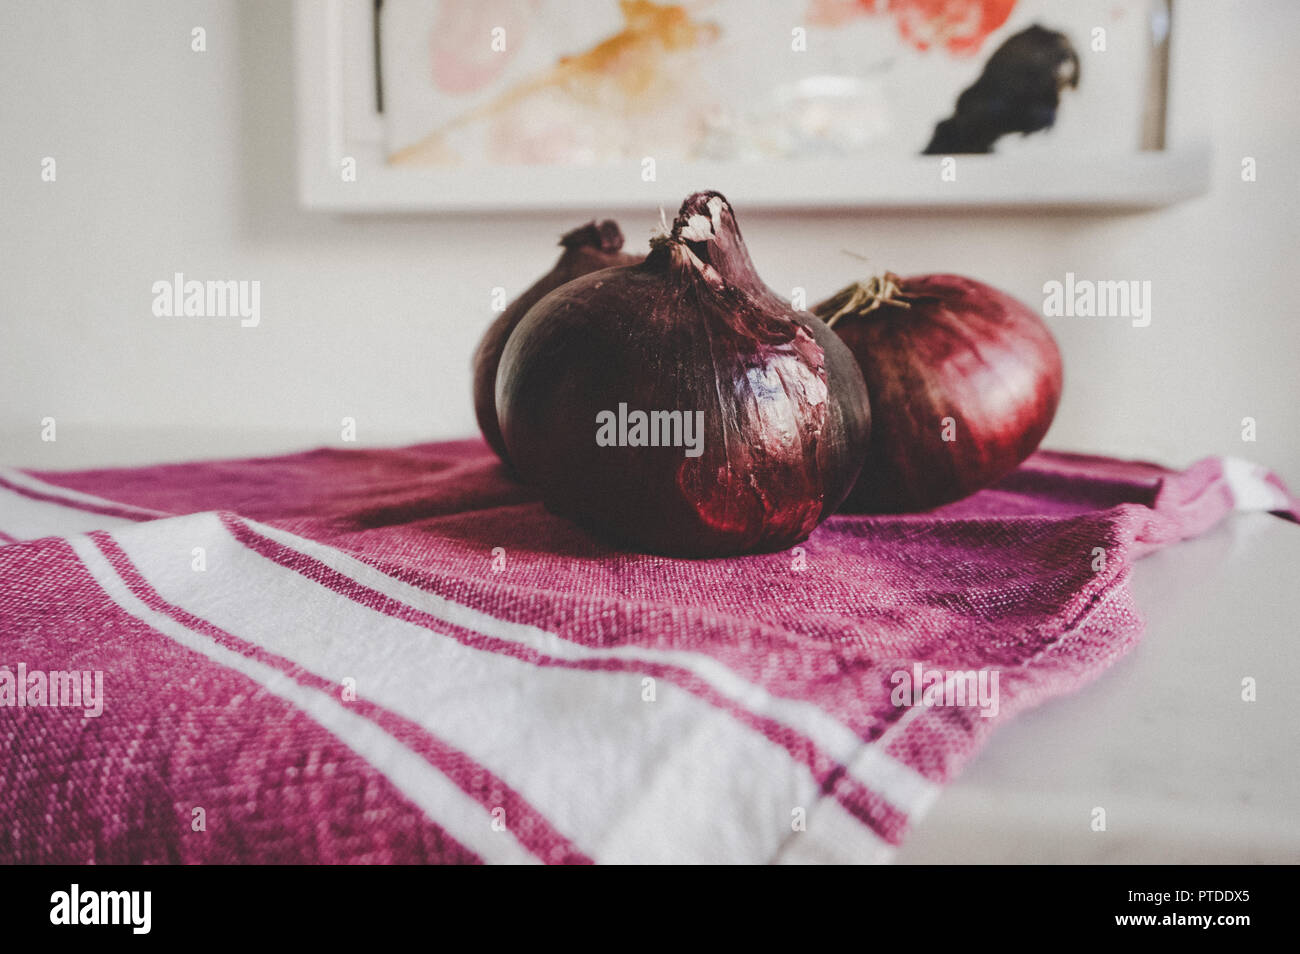 Beautiful organic purple onions in artistic gourmet kitchen on purple dish towel with natural light and abstract art with room for copy Stock Photo